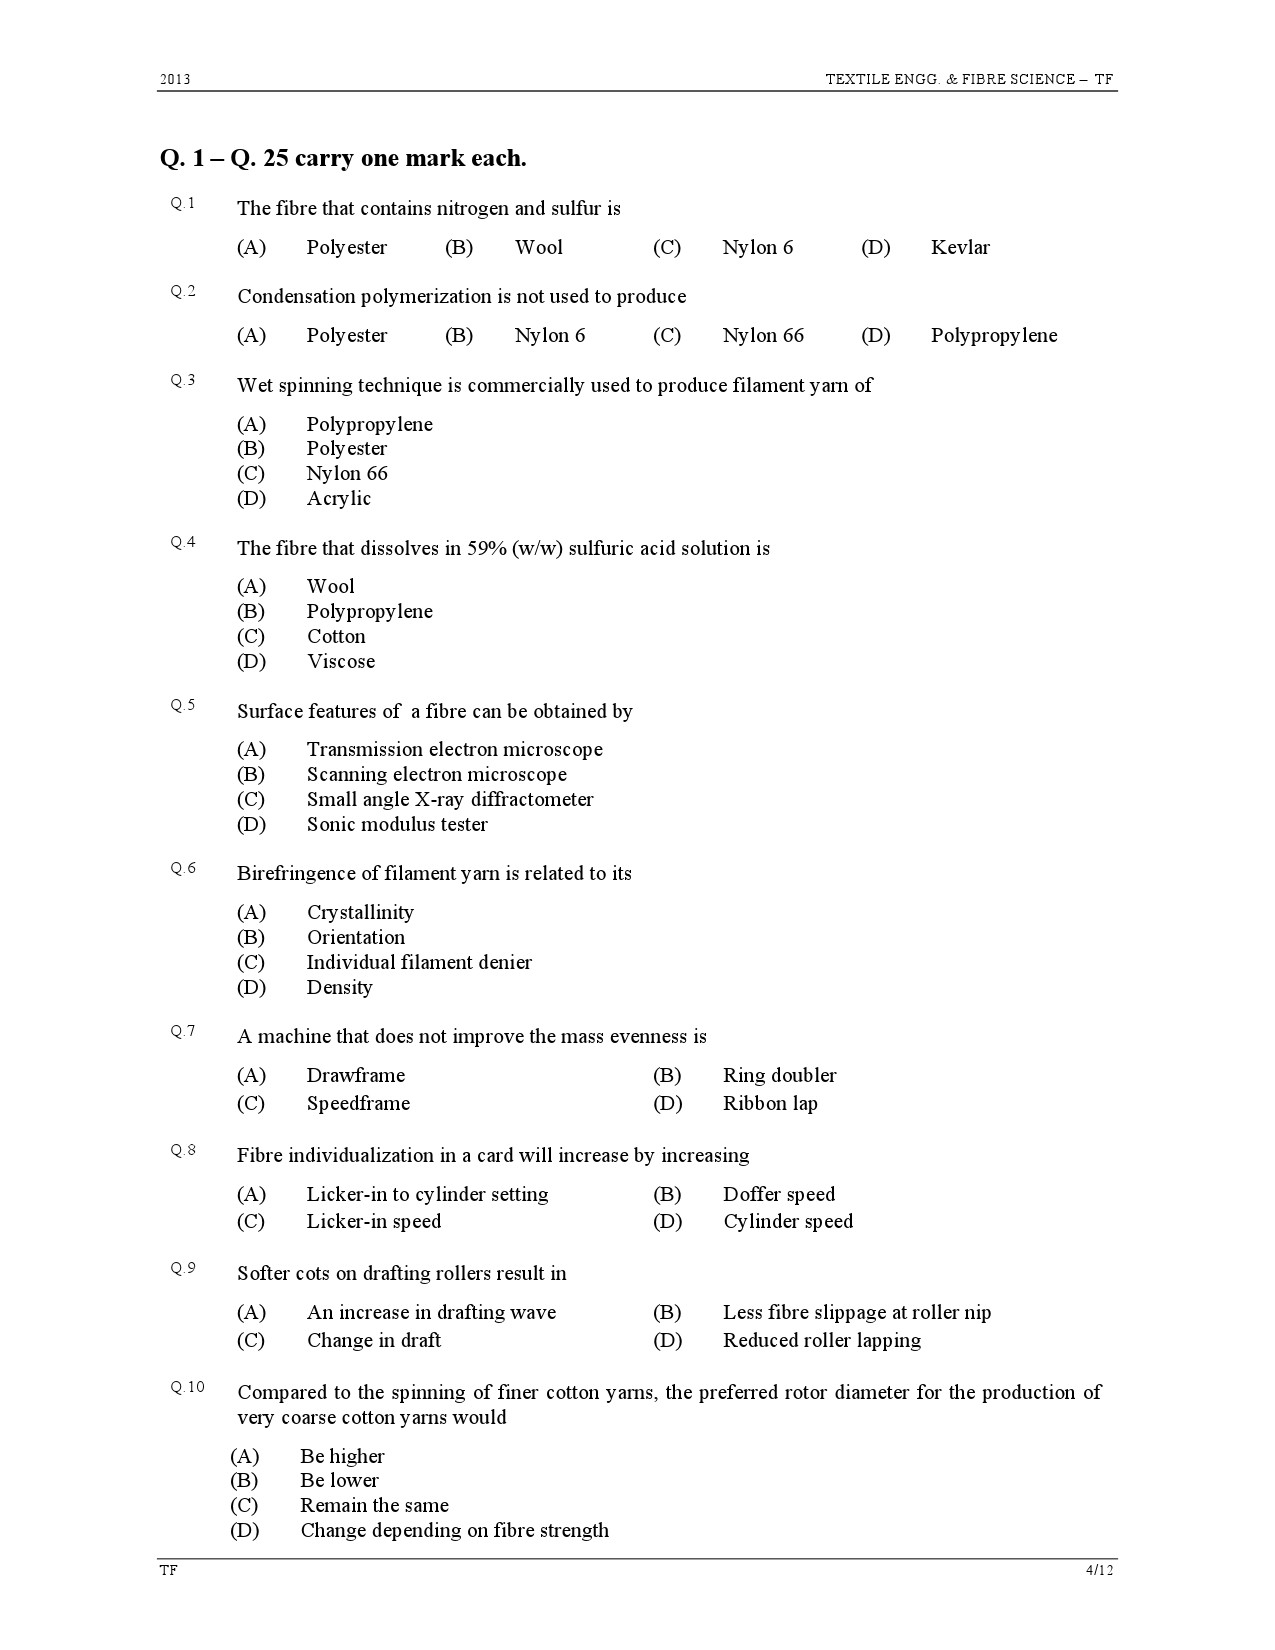 GATE Exam Question Paper 2013 Textile Engineering and Fibre Science 4